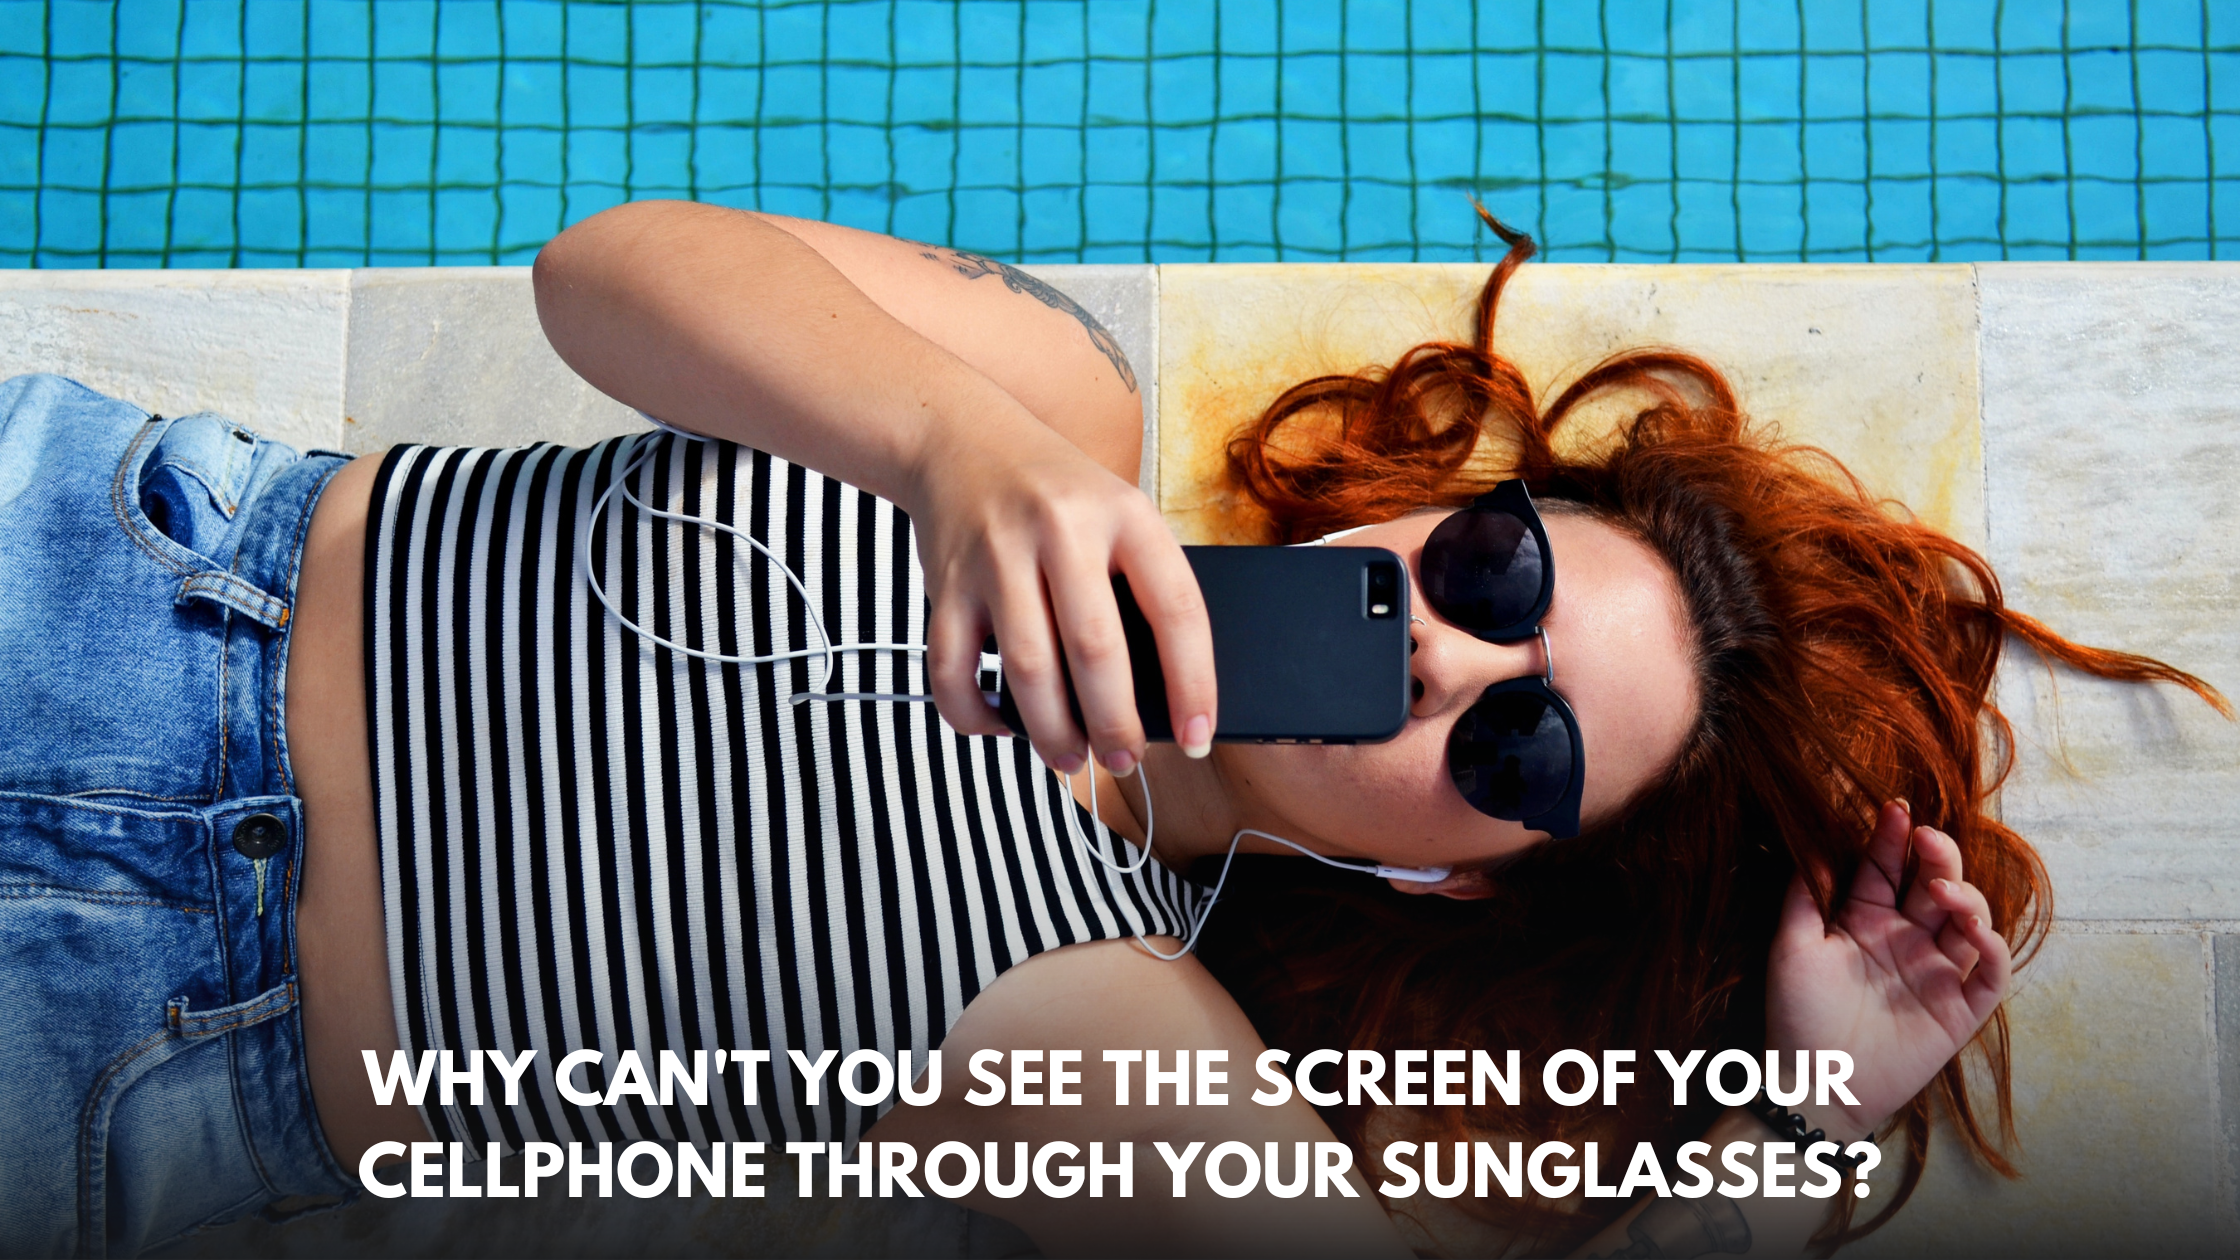 Why Can't You See The Screen Of Your Cellphone Through Your Sunglasses?